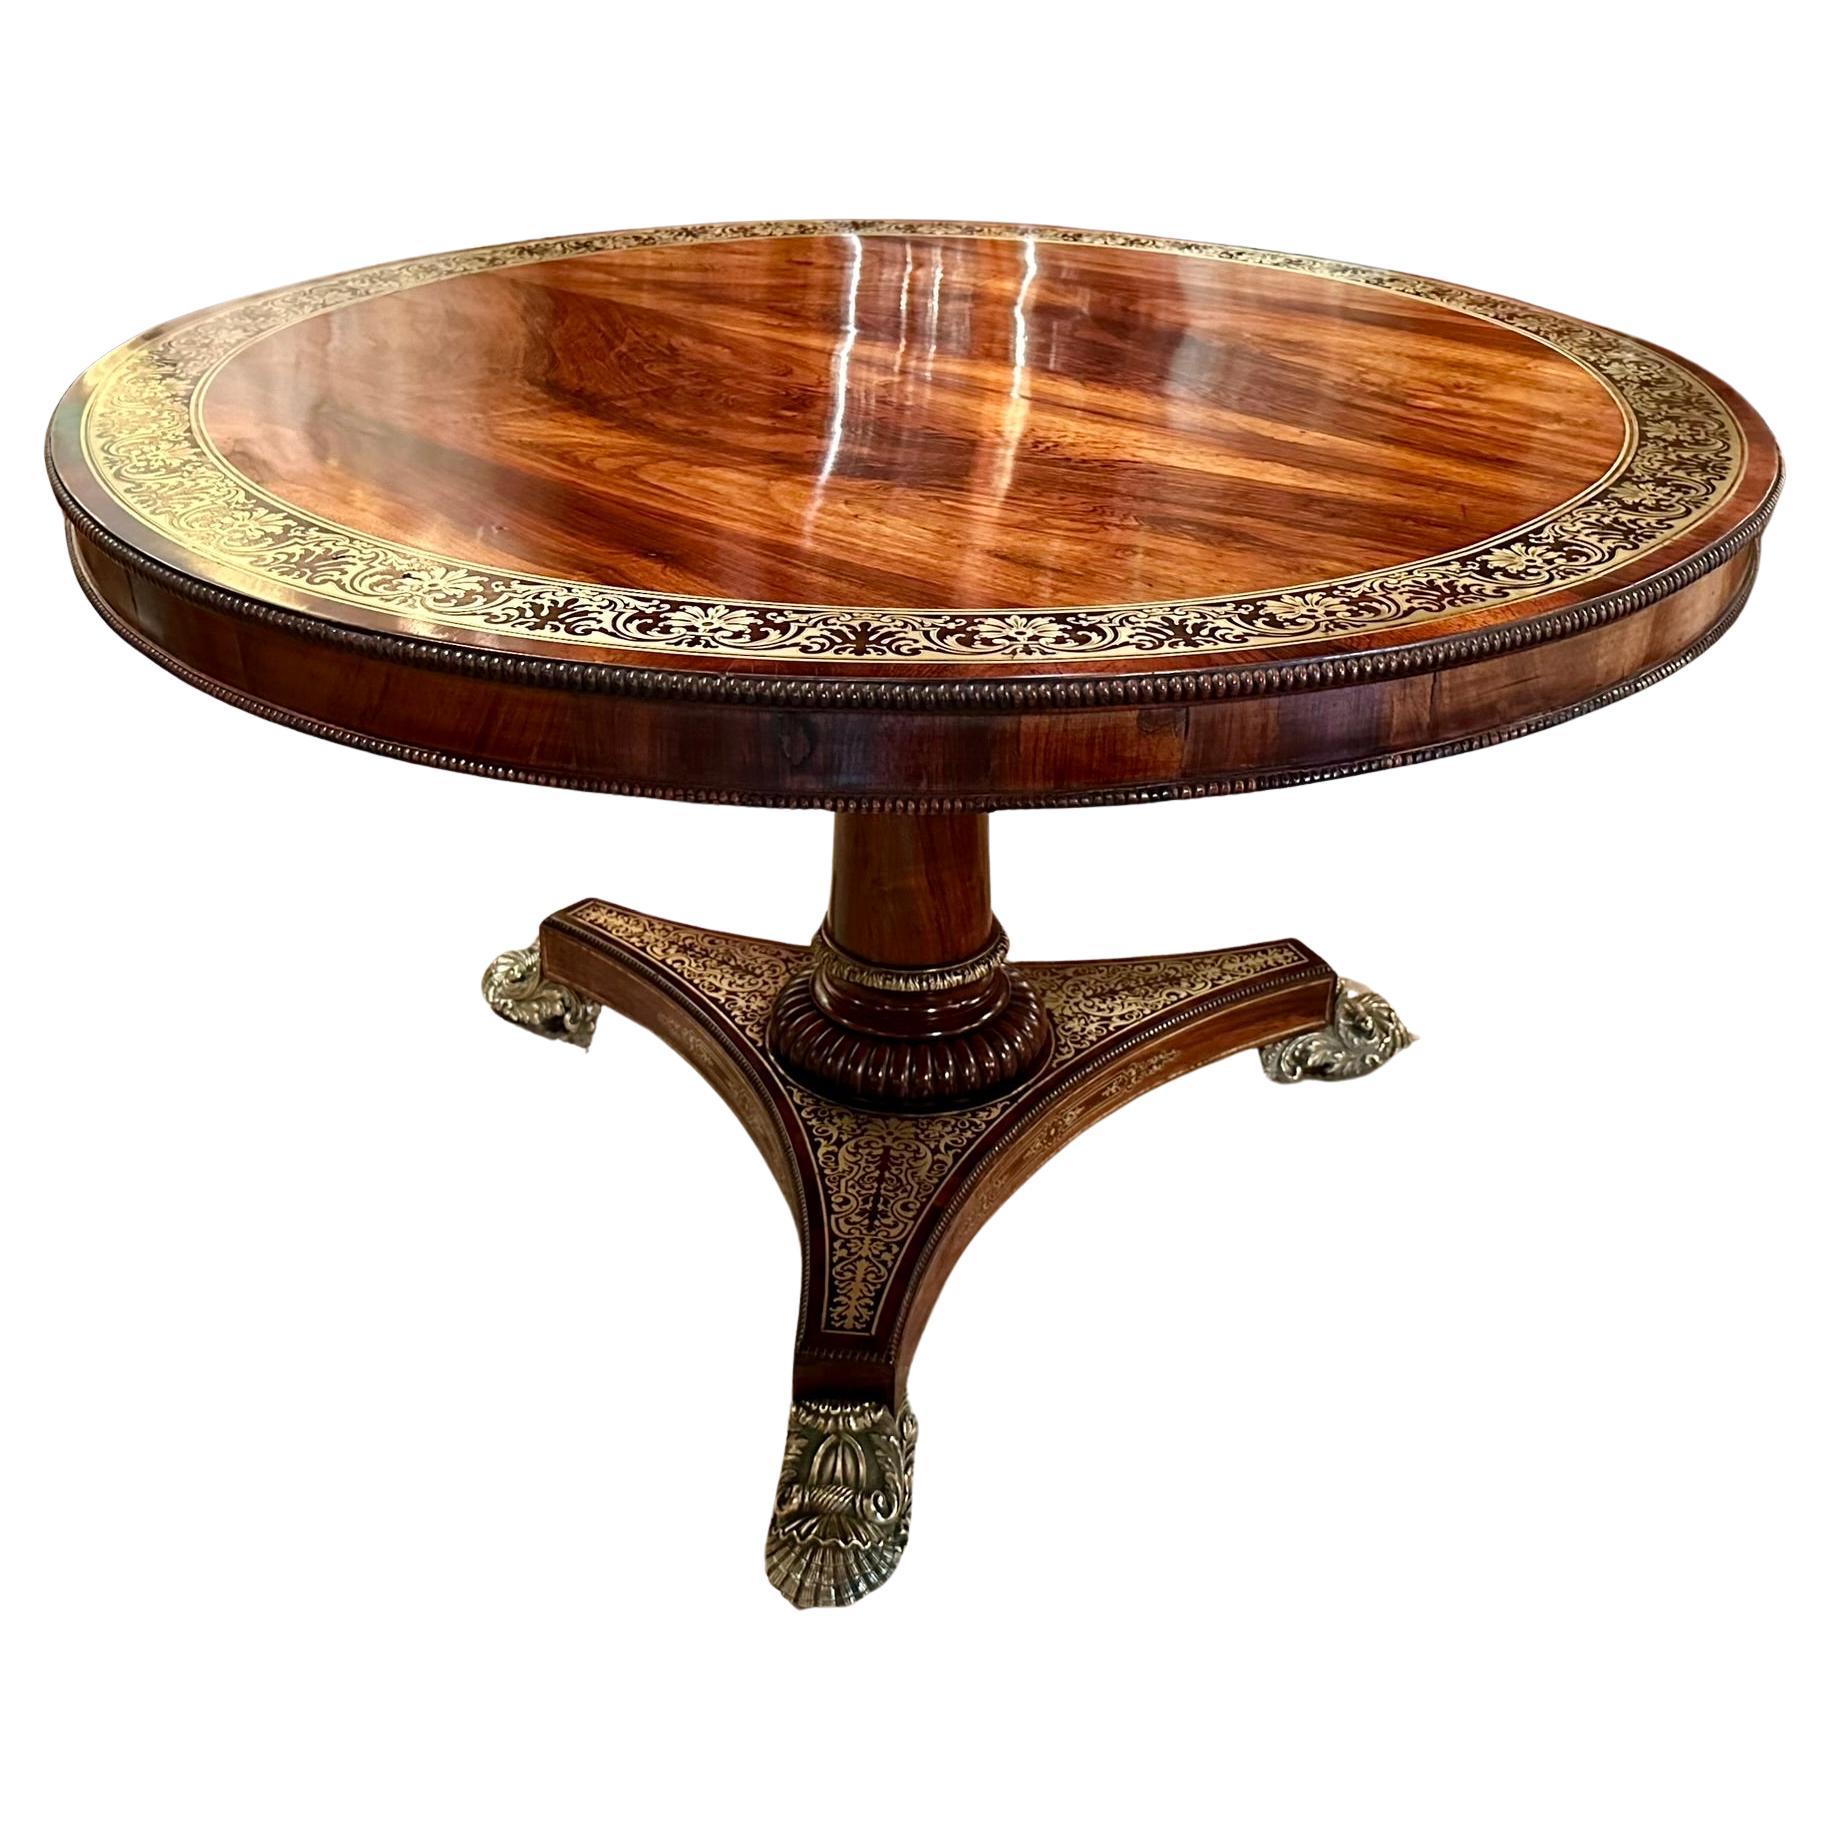 Antique English Regency Rosewood with Brass Inlay Tilt Top Center Table, Ca 1830 For Sale